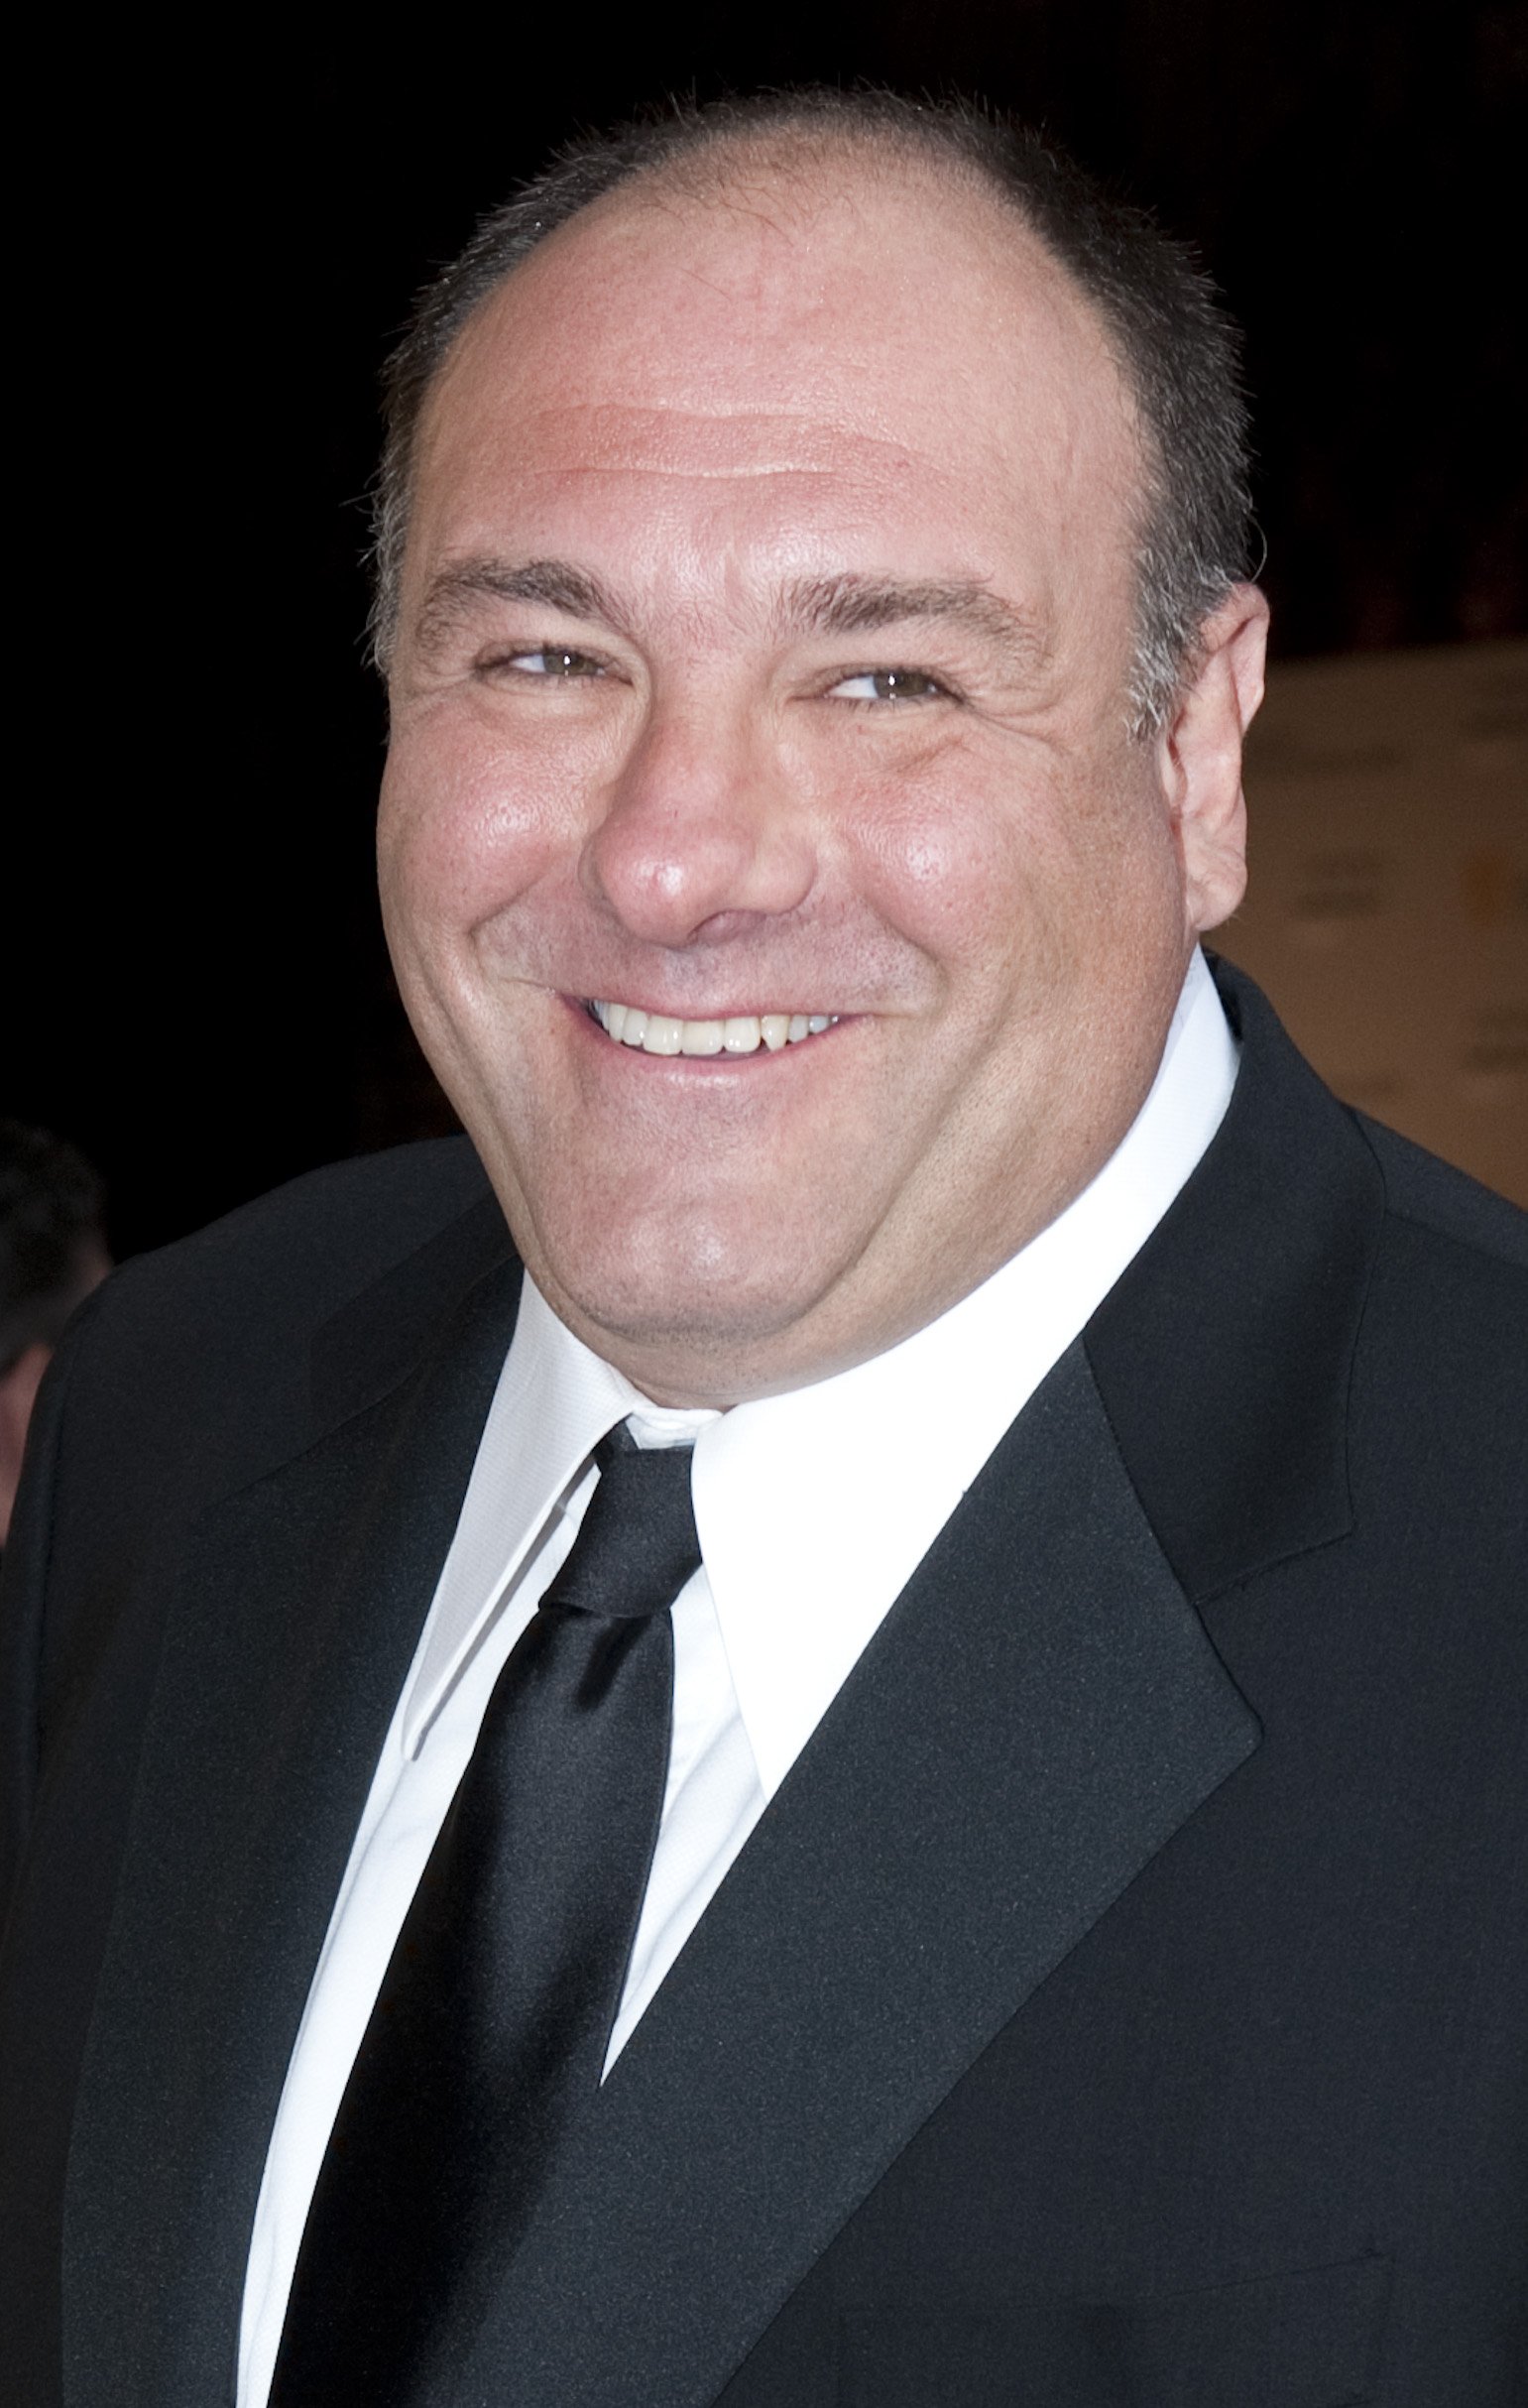 Gandolfini passed away in 2013, at the age of 51. Image credit: Getty/GlobalImagesUkraine